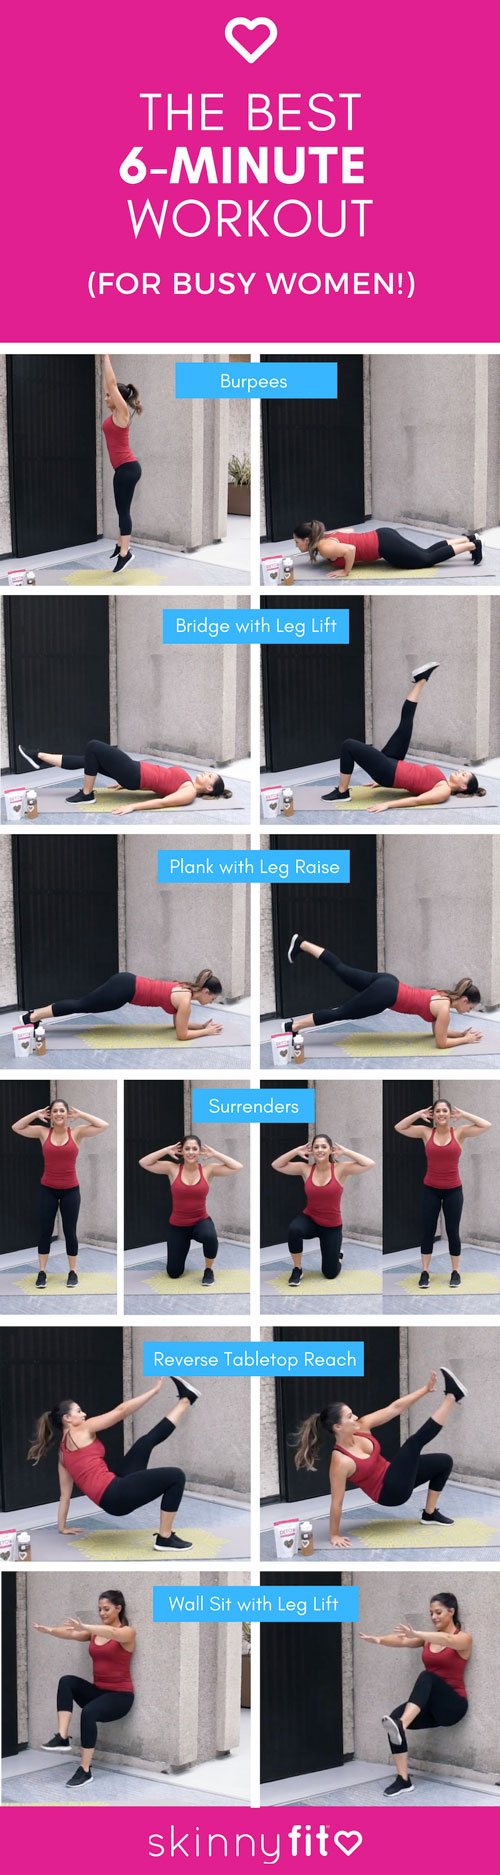 6 minute workout for busy women